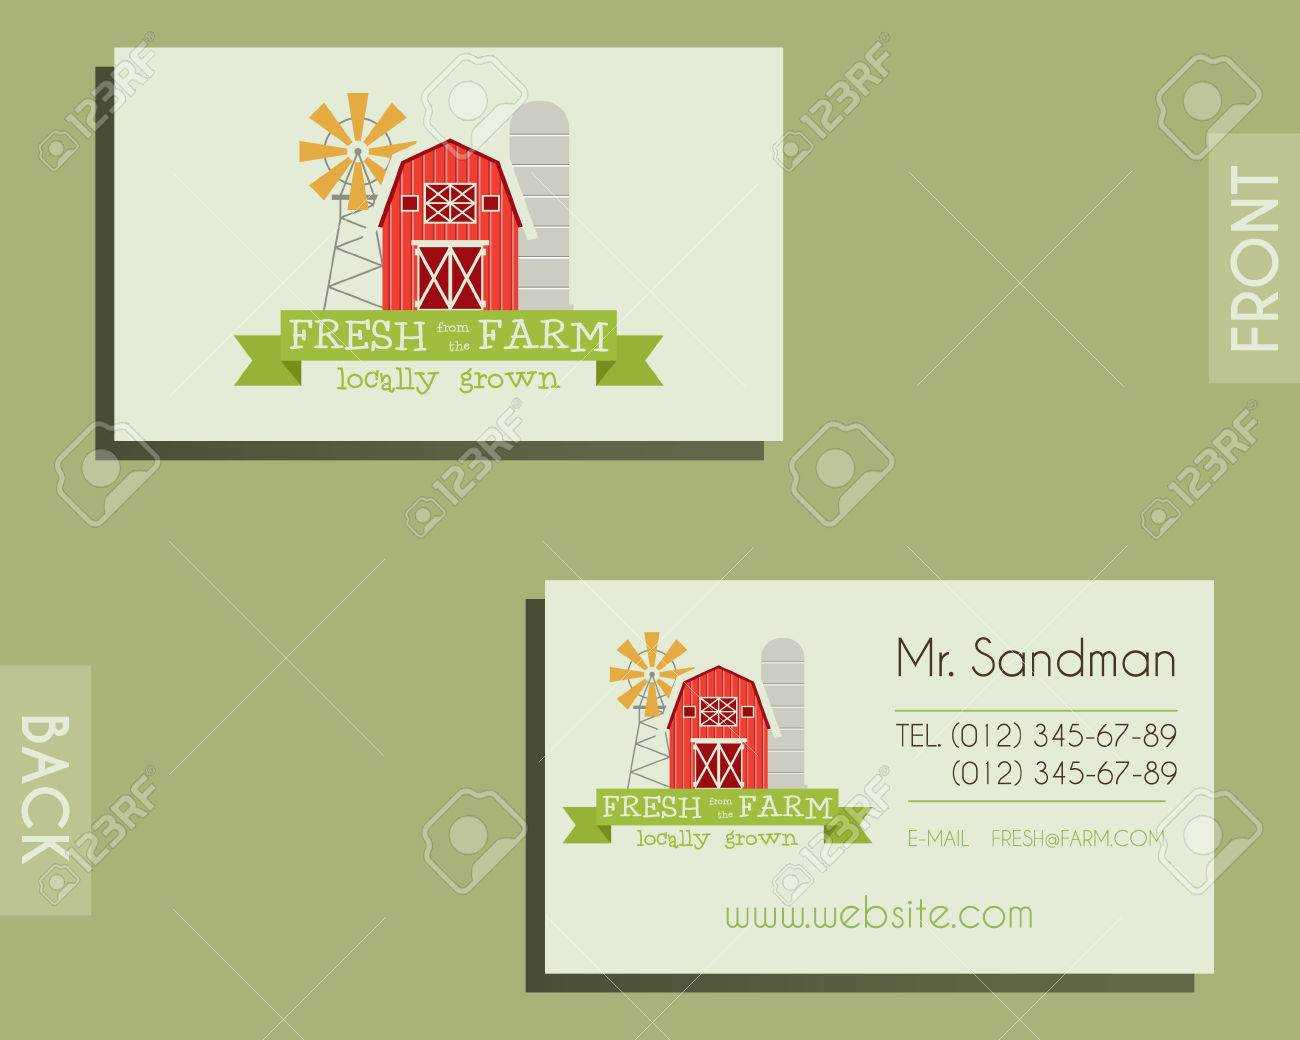 Eco, Organic Visiting Card Template. For Natural Shop, Farm Products And  Other Bio, Organic Business. Ecology Theme. Eco Design. Vector Illustration Regarding Bio Card Template